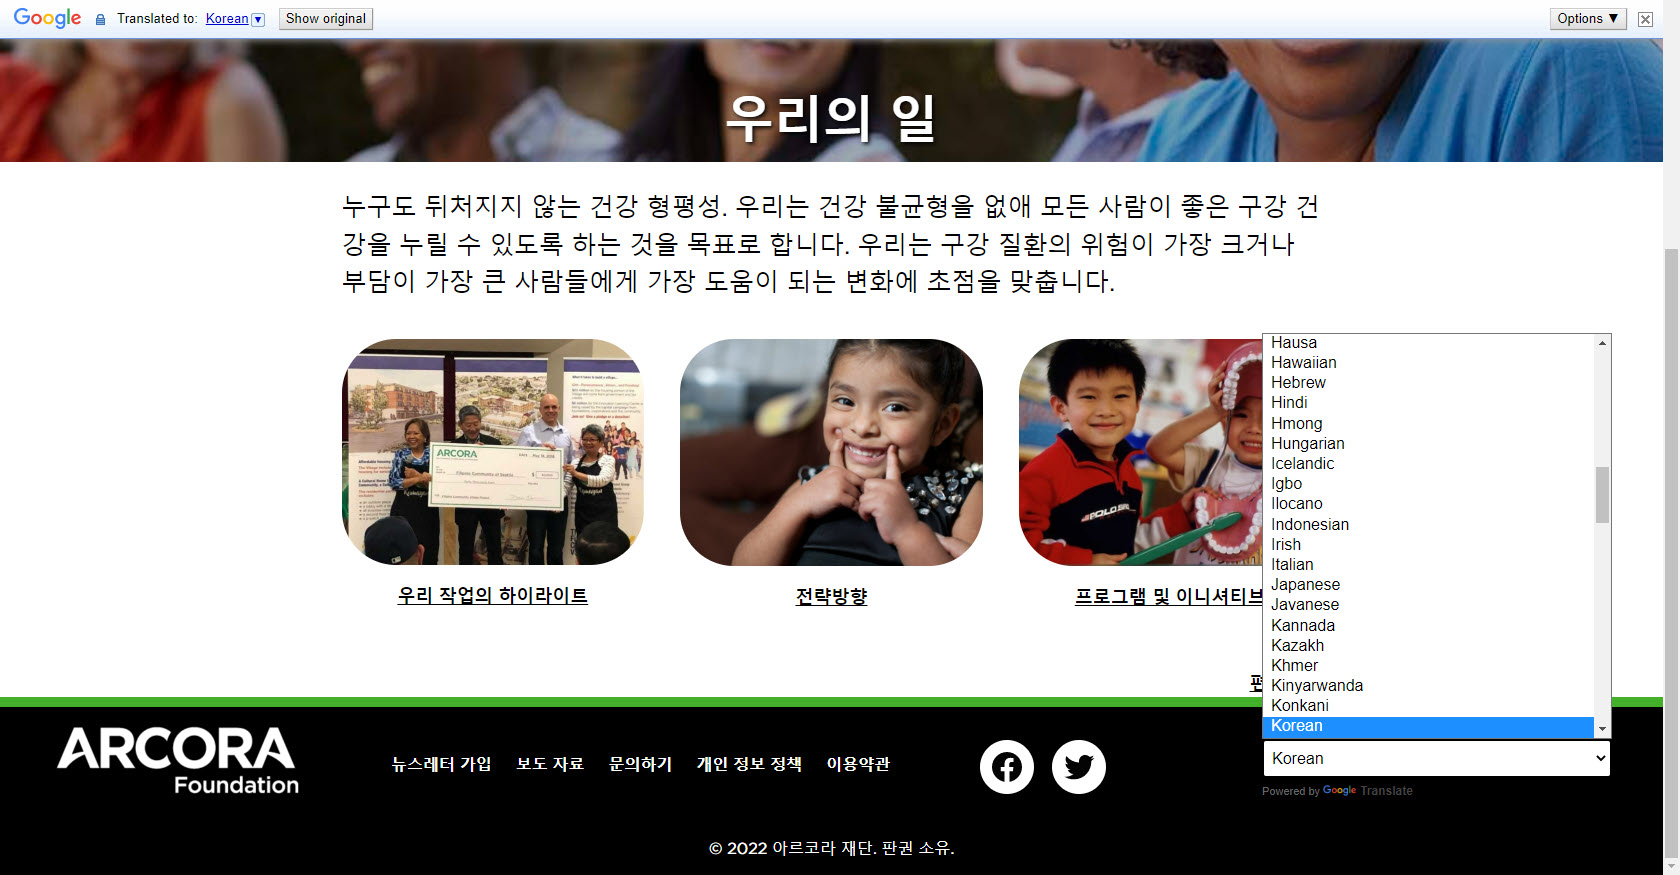 Screen grab of Arcora Foundation webpage translated into Korean. At the bottom of the image, the Google Translate menu is expanded with "Korean" highlighted in blue.